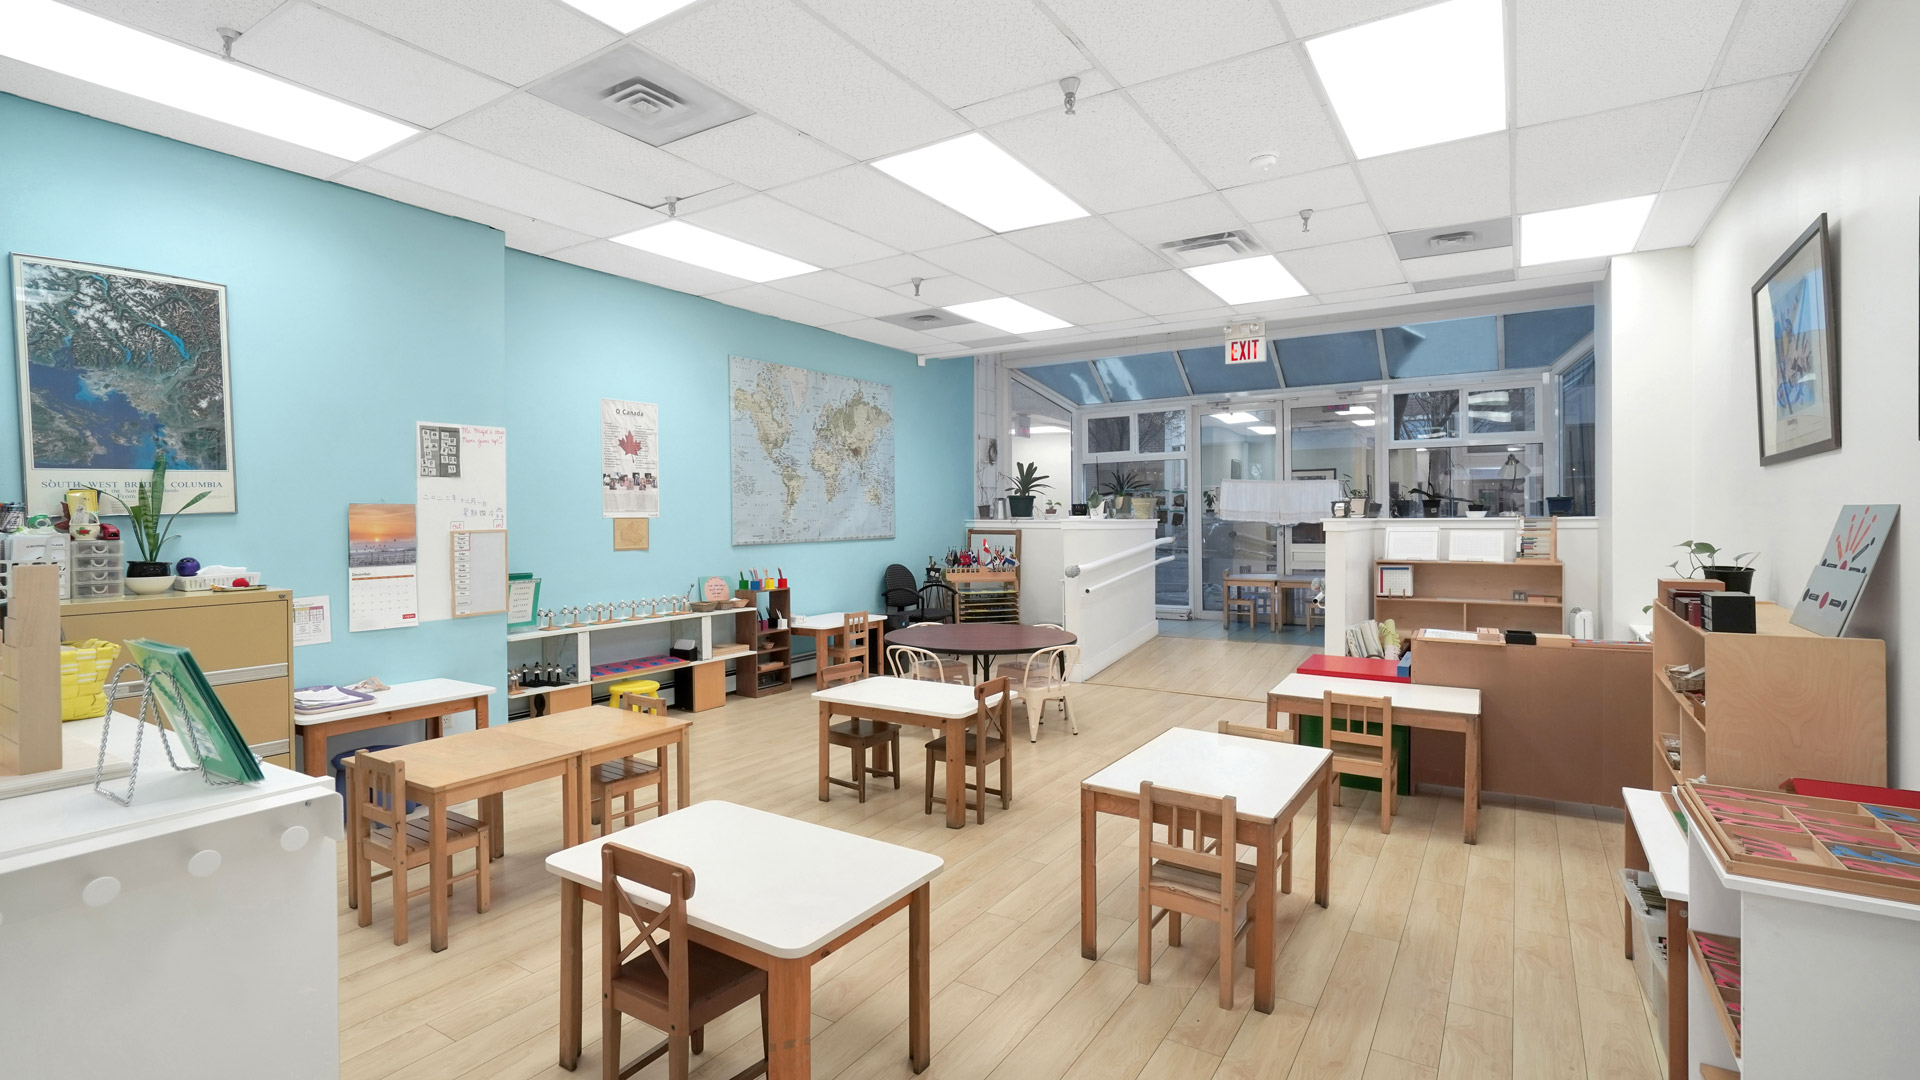 Vancouver Pre-School & Elementary Business for Sale